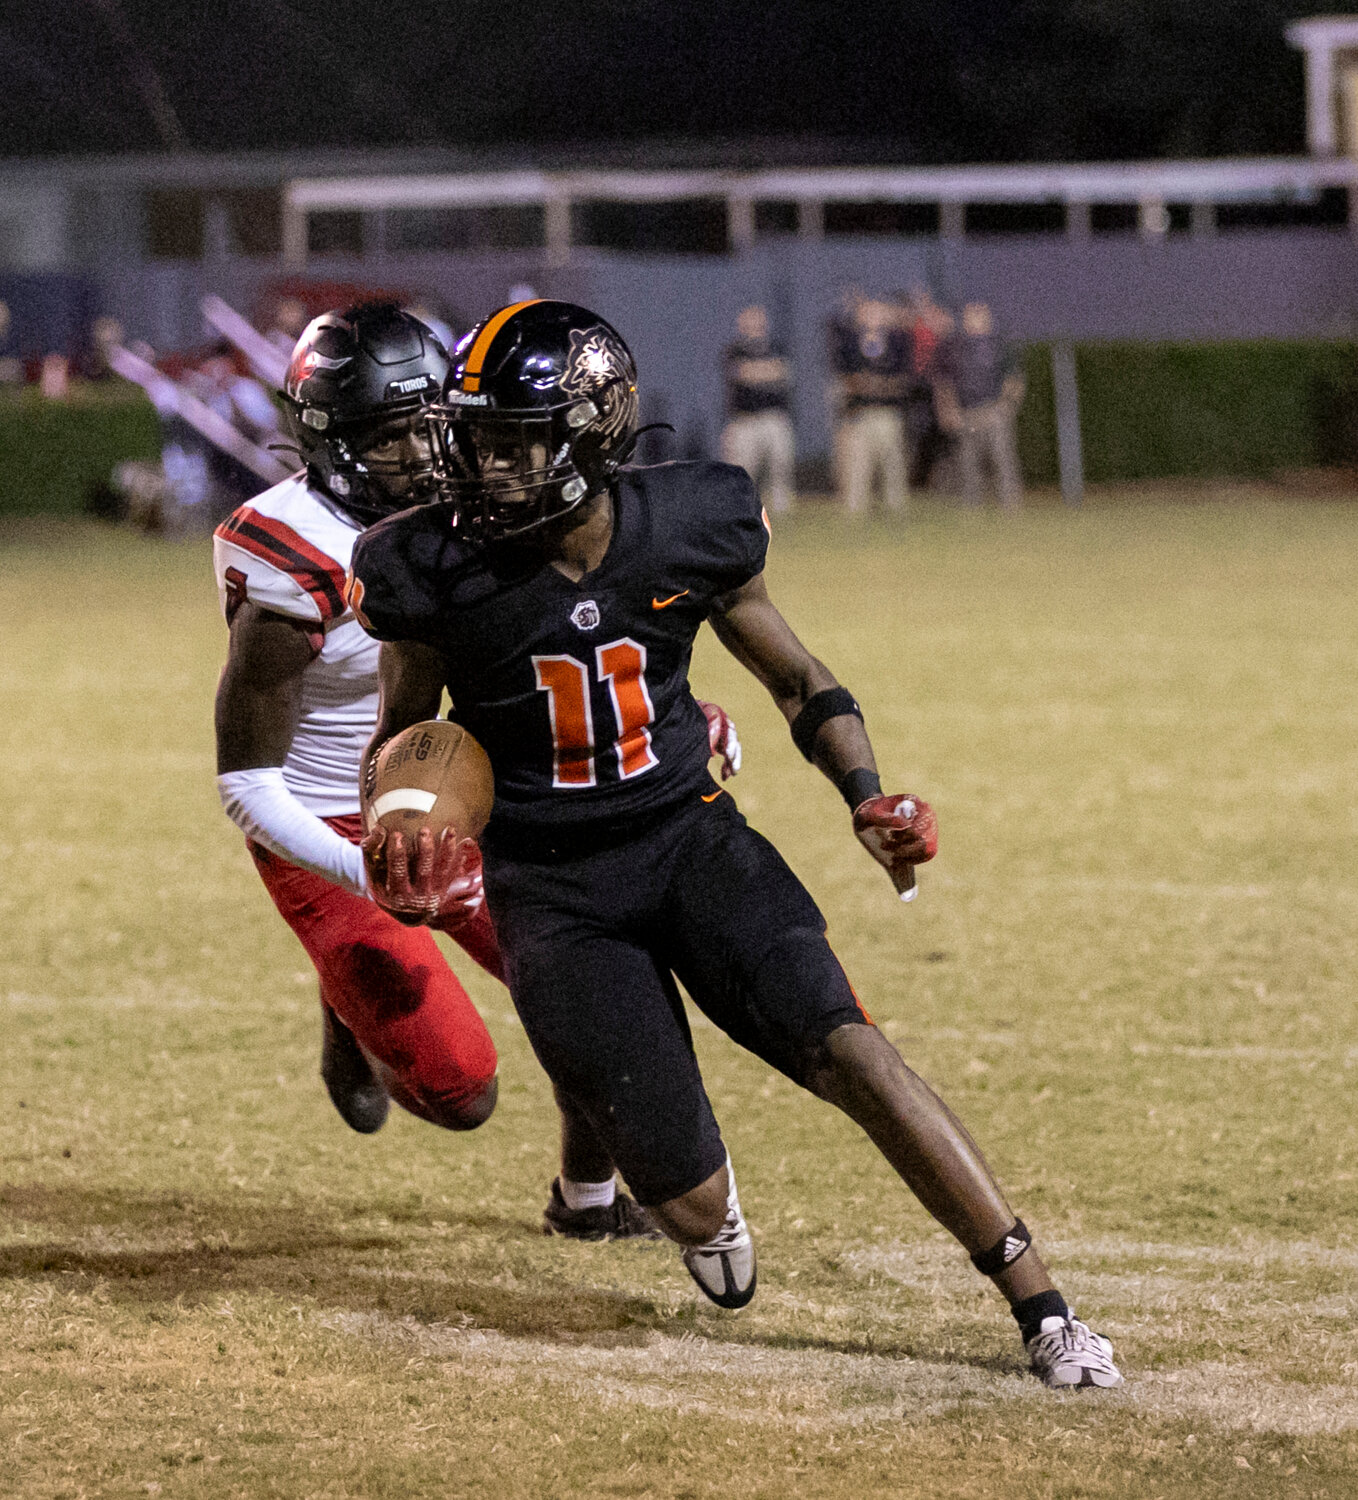 Baldwin County junior Trecarious French turns the corner after a second-half catch Friday night on Mitchell Field at Lyle Underwood Stadium as part of the Tigers’ game against the Spanish Fort Toros. French later came up with a reception on fourth down to extend Baldwin County’s final drive of the game.